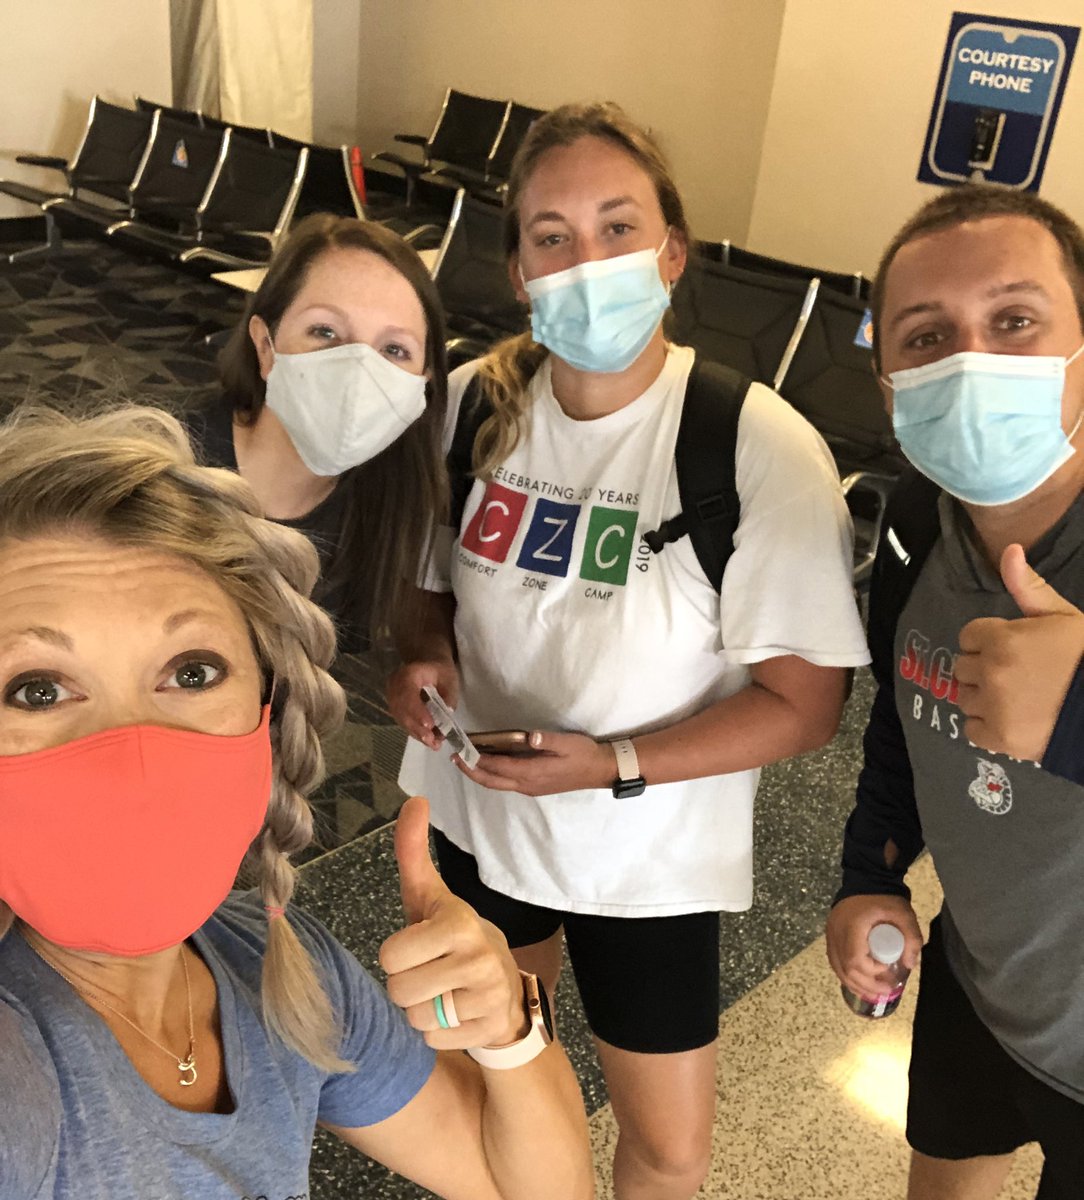 Richmond, VA ➡️ Las Vegas, NV ✈️

We’ve got a great @ComfortZoneCamp team on the way to serve grieving children for the first time ever in Nevada! Operation put a smile on a kid’s face is soon to be underway 😃😃😃

#GrieveHealGrow ❤️💙💚